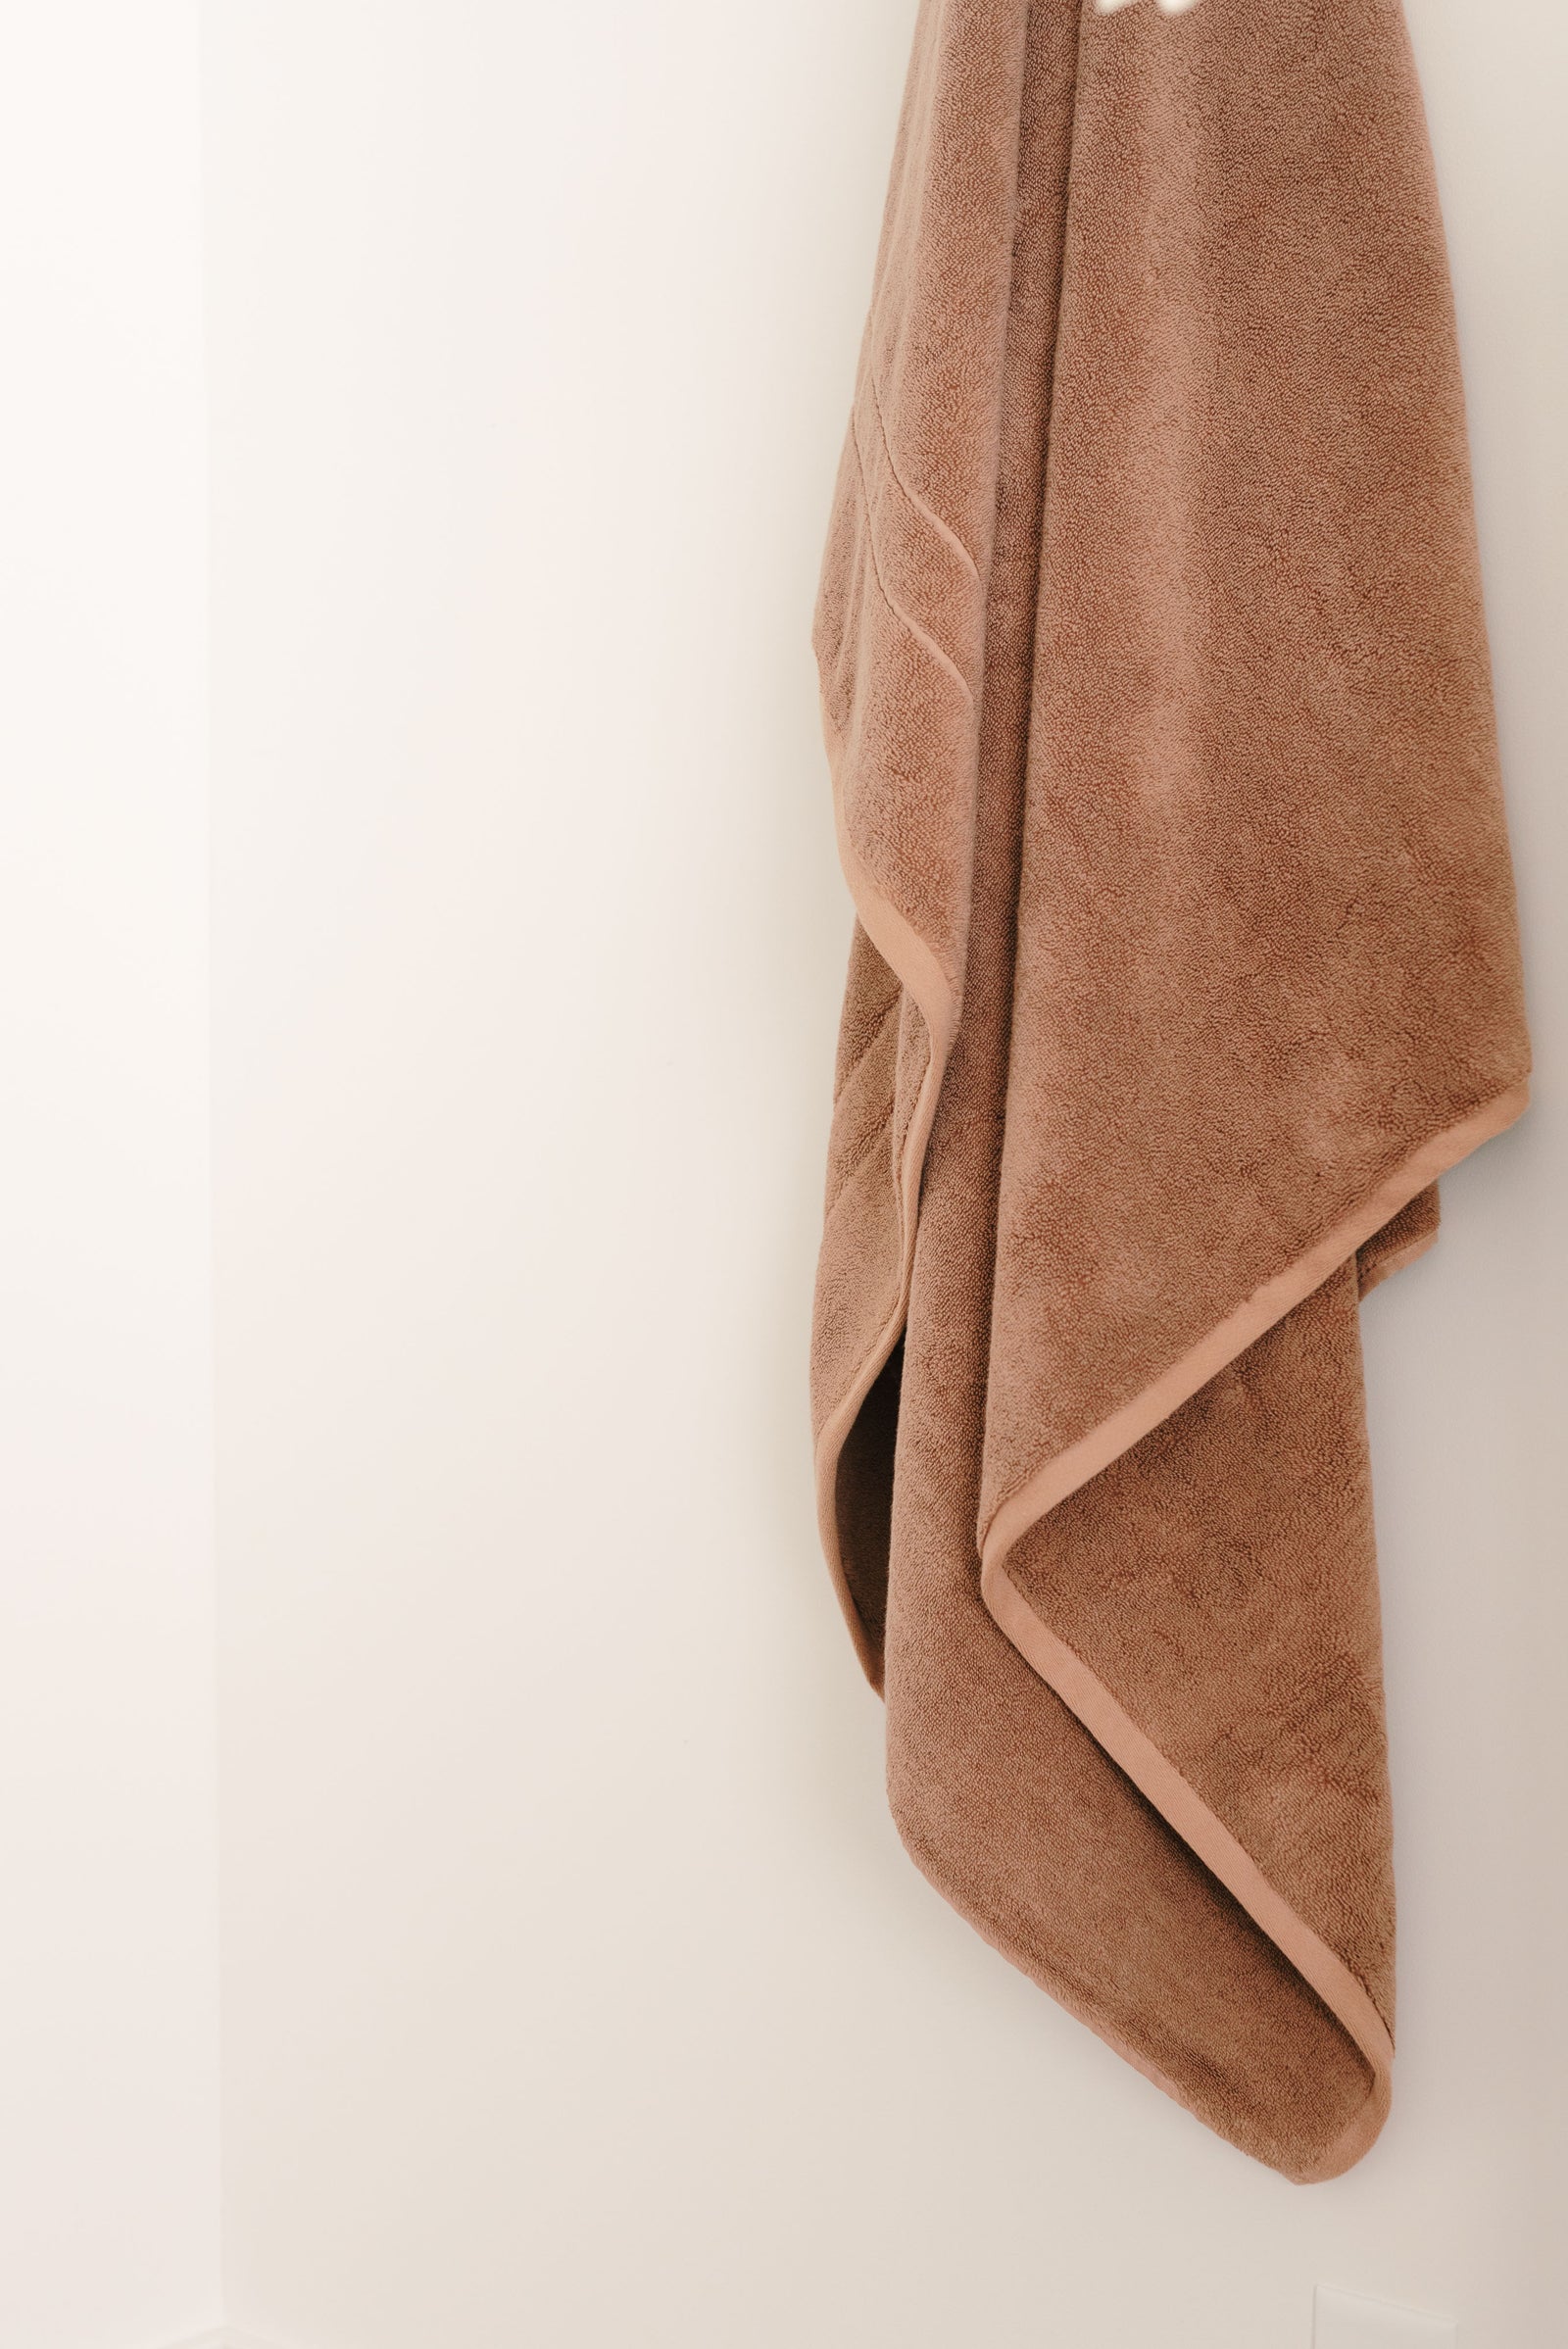 Premium Plush Bath Towel in the color clay hung on a white wall. 